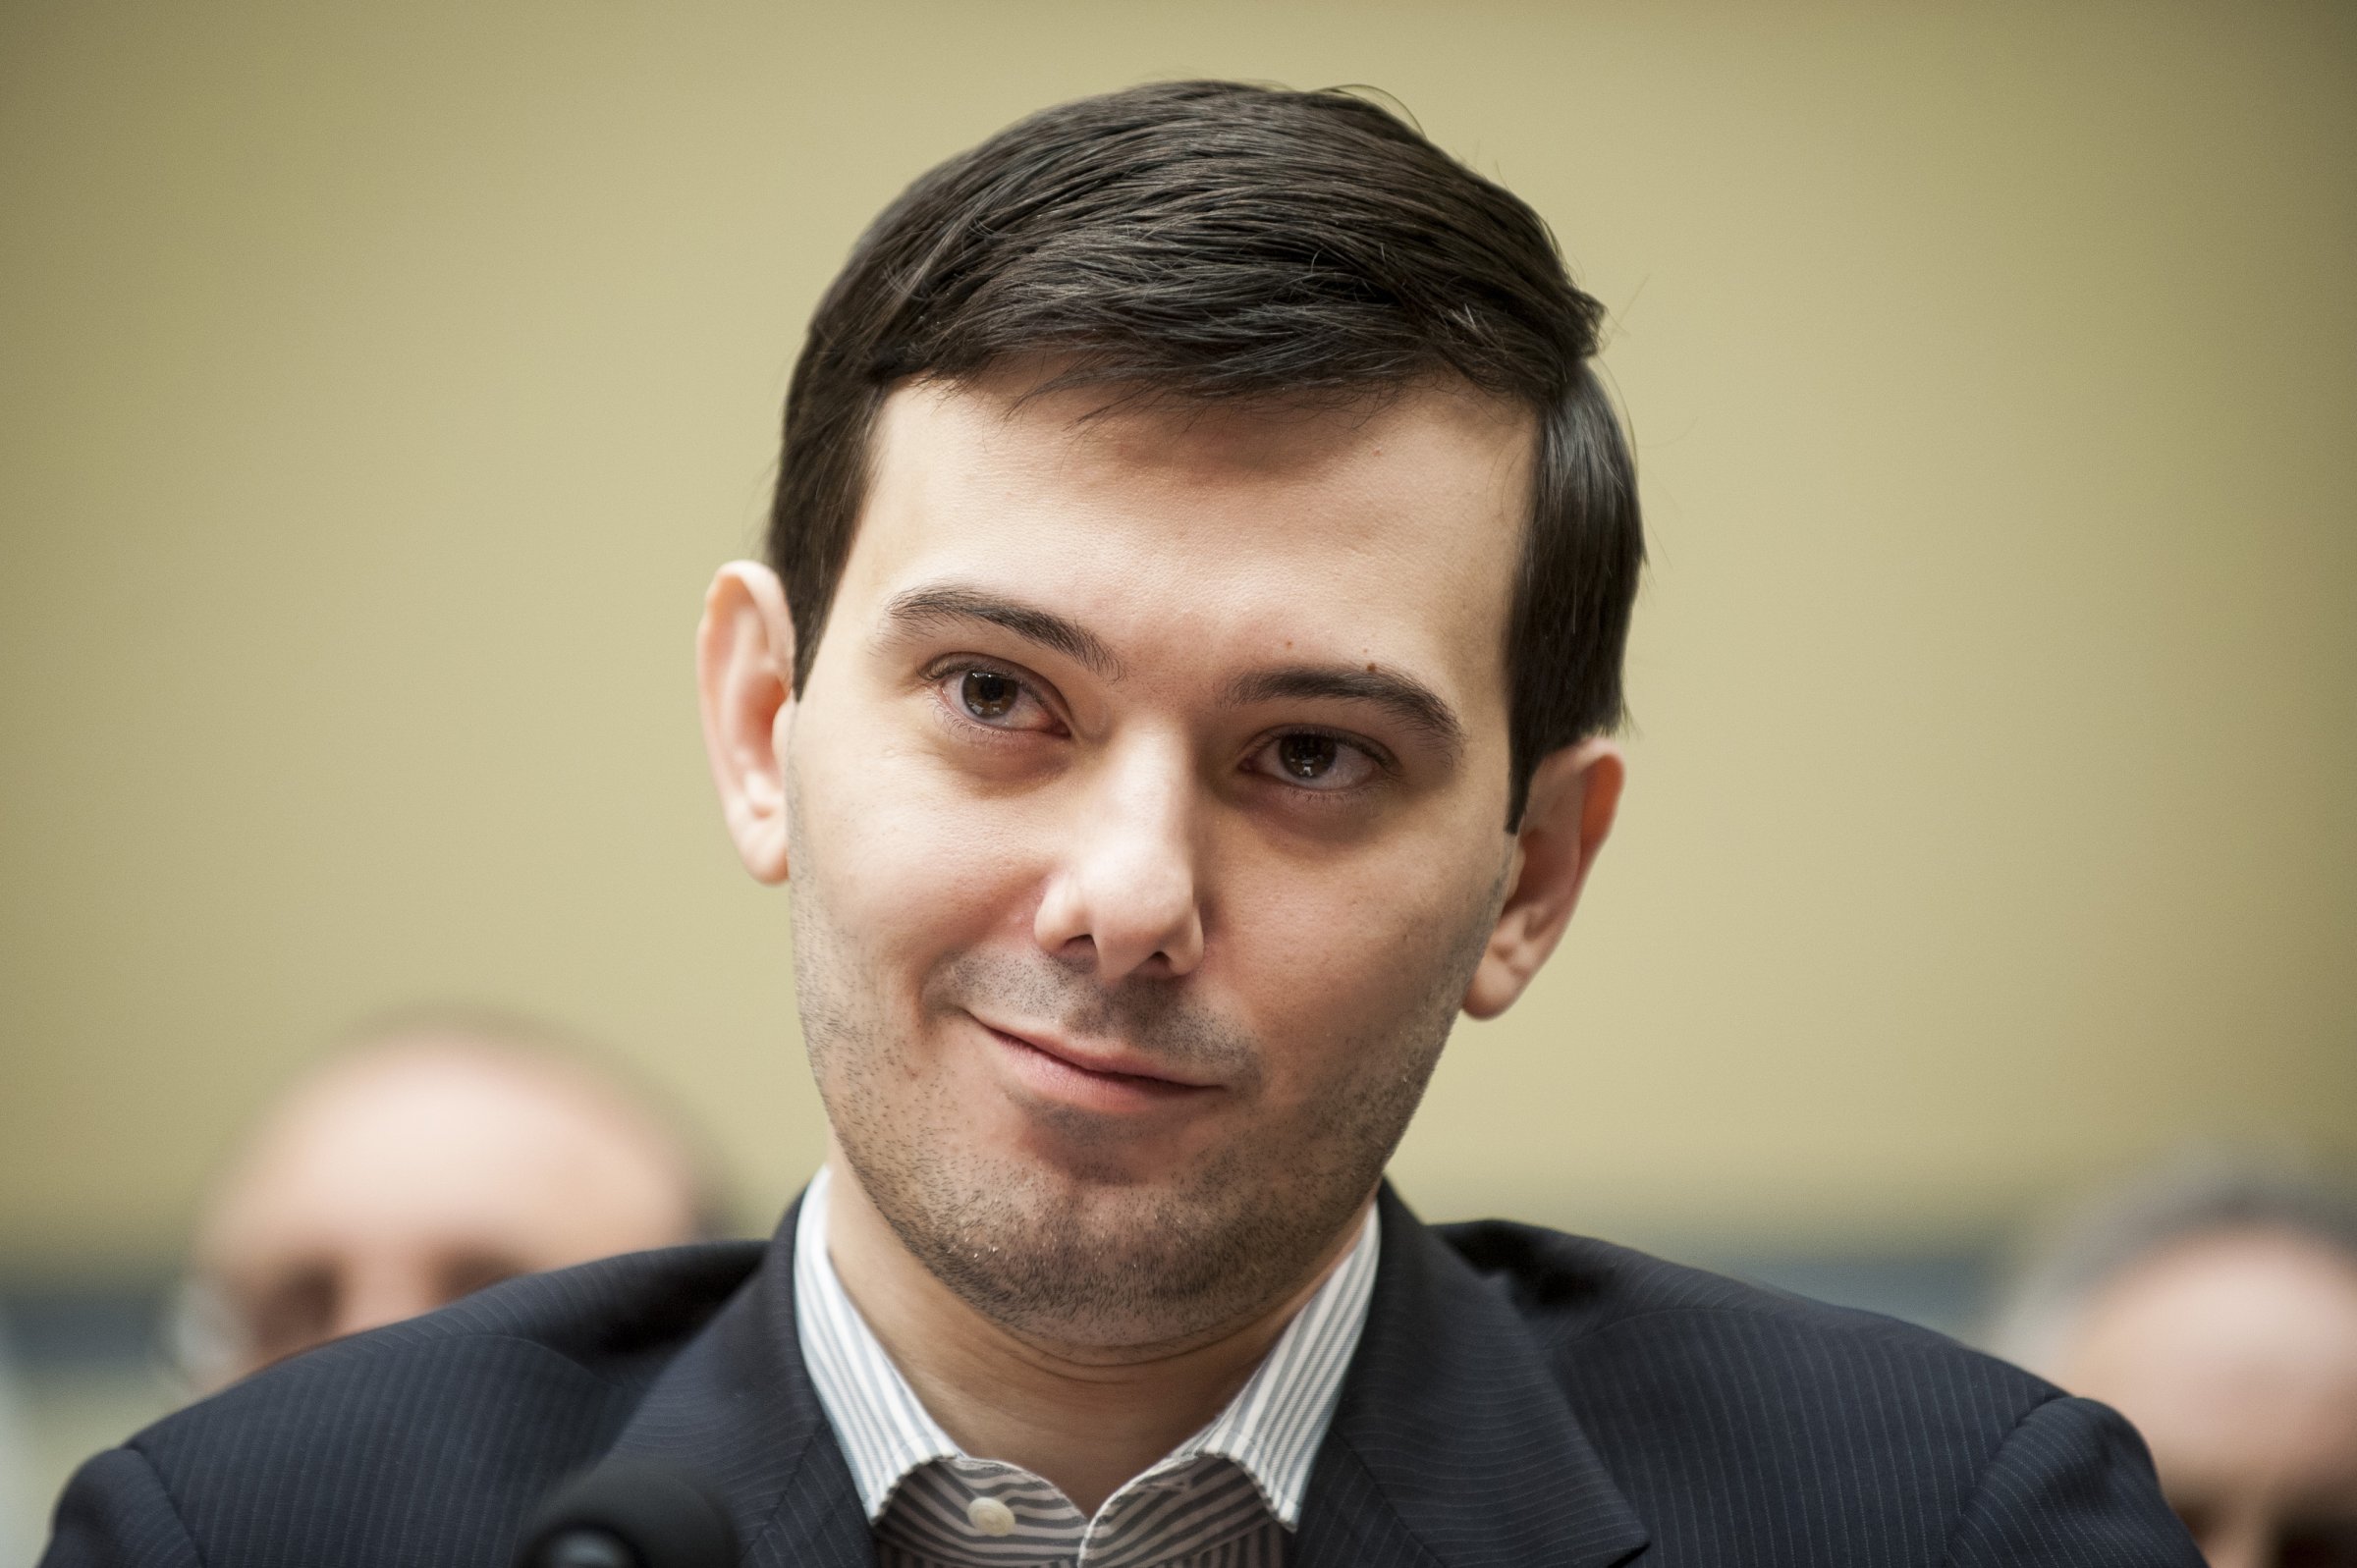 Martin Shkreli, former chief executive officer of Turing Pharmaceuticals LLC, smiles during a House Committee on Oversight and Government Reform hearing on prescription drug prices in Washington, D.C., U.S., on Thursday, Feb. 4, 2016.